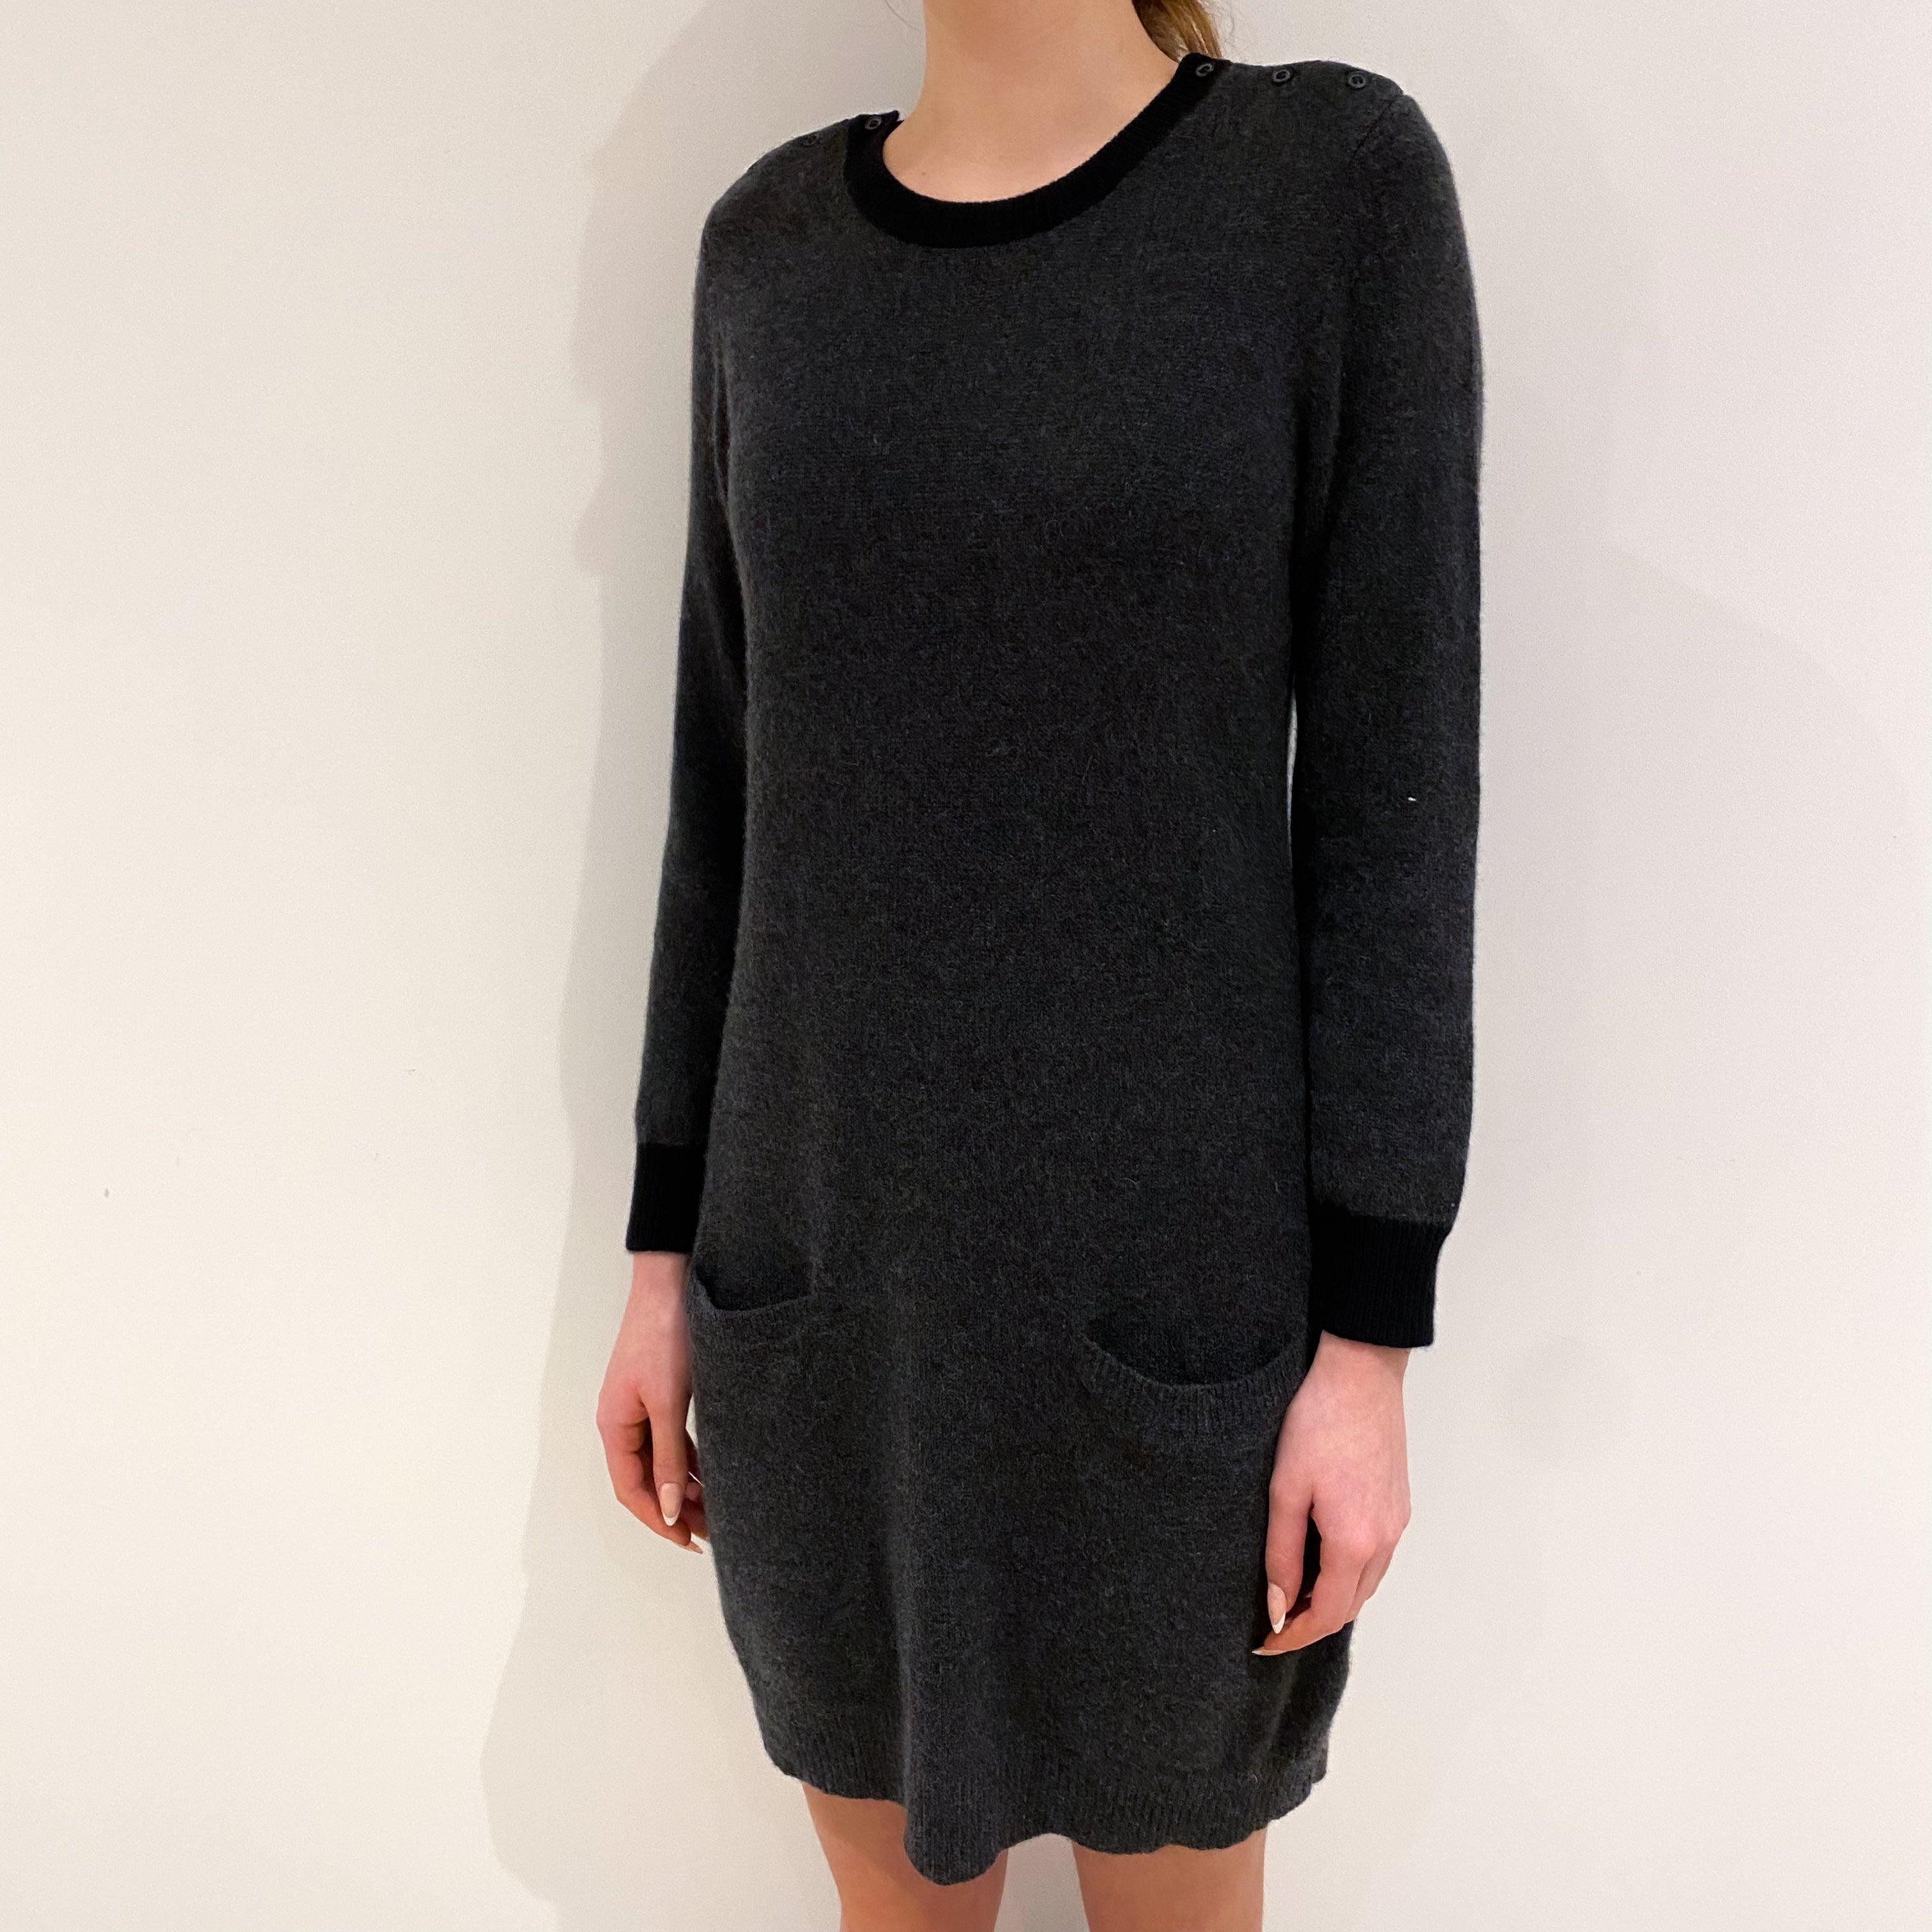 Charcoal Grey Cashmere Crew Neck Dress with Pockets Extra Small